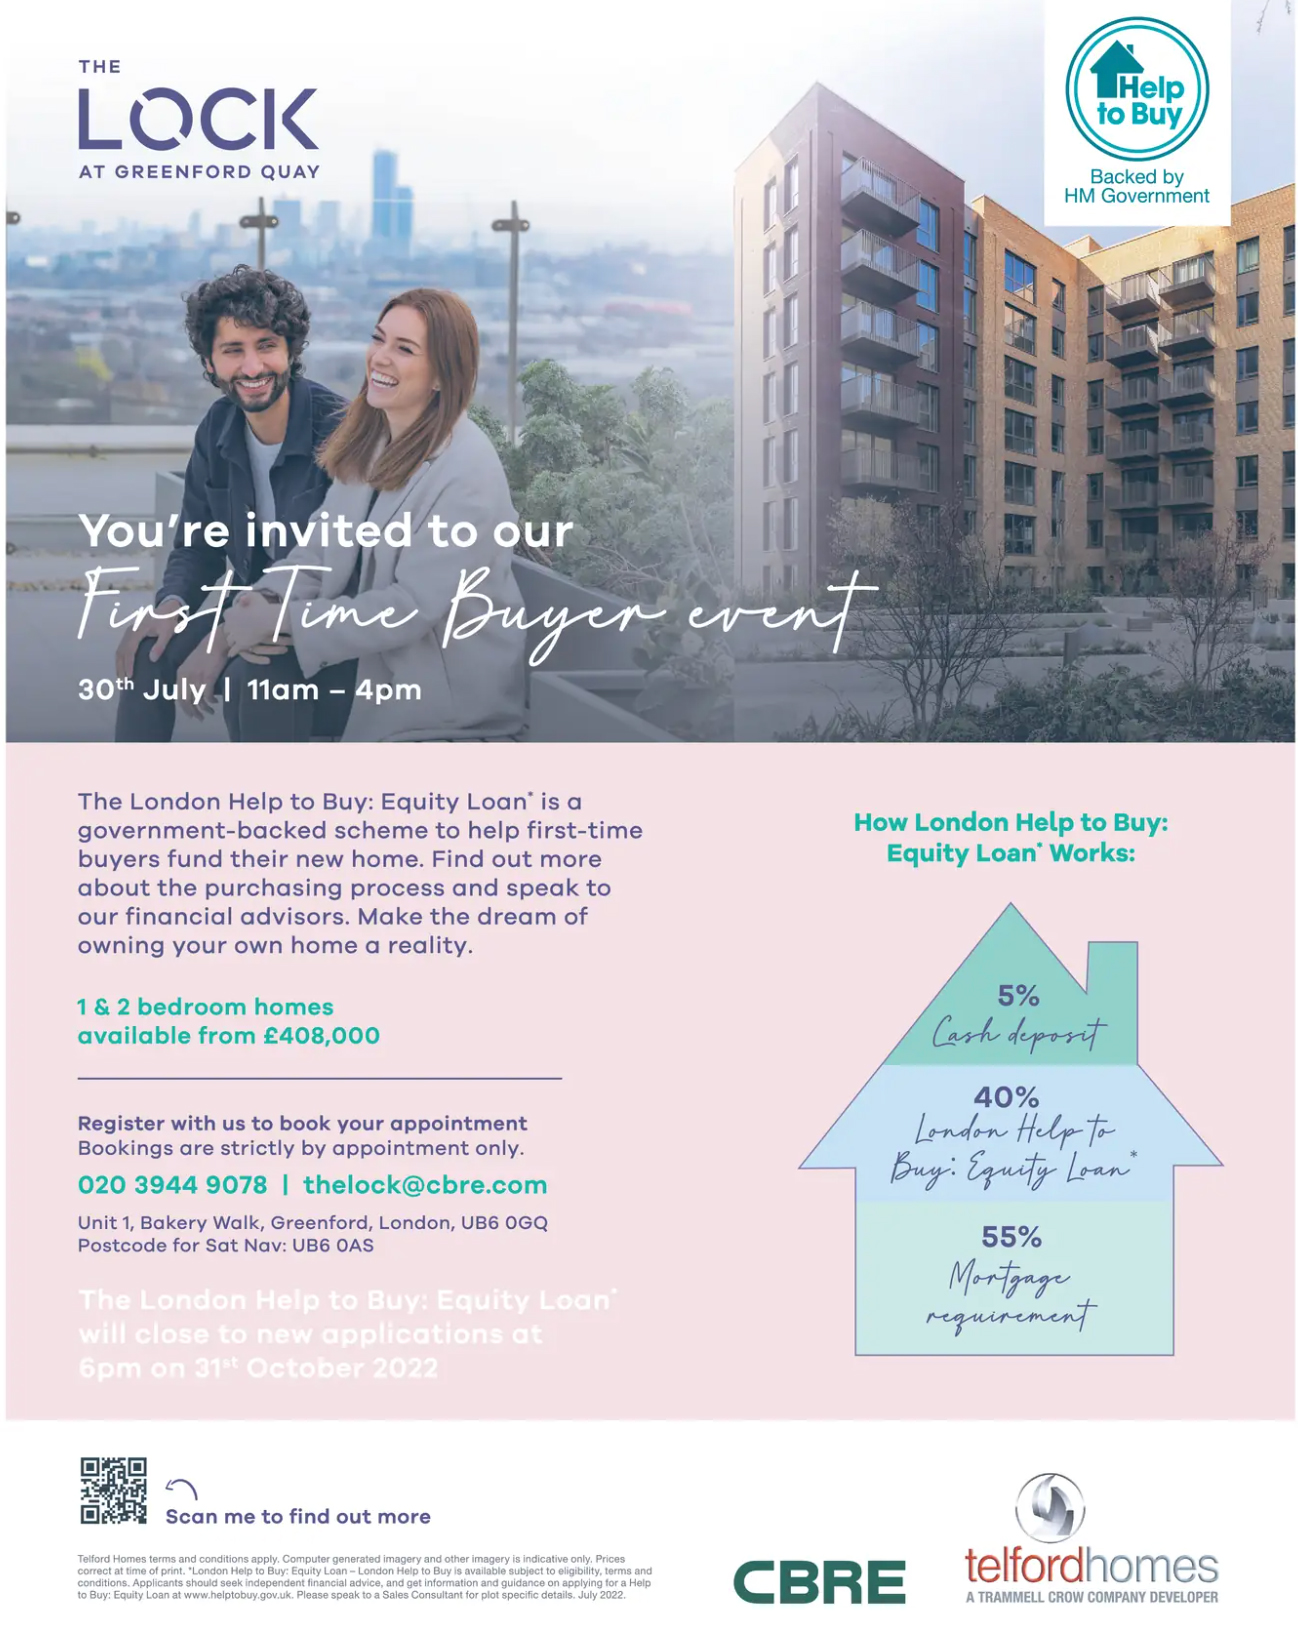 First Time Buyer Event